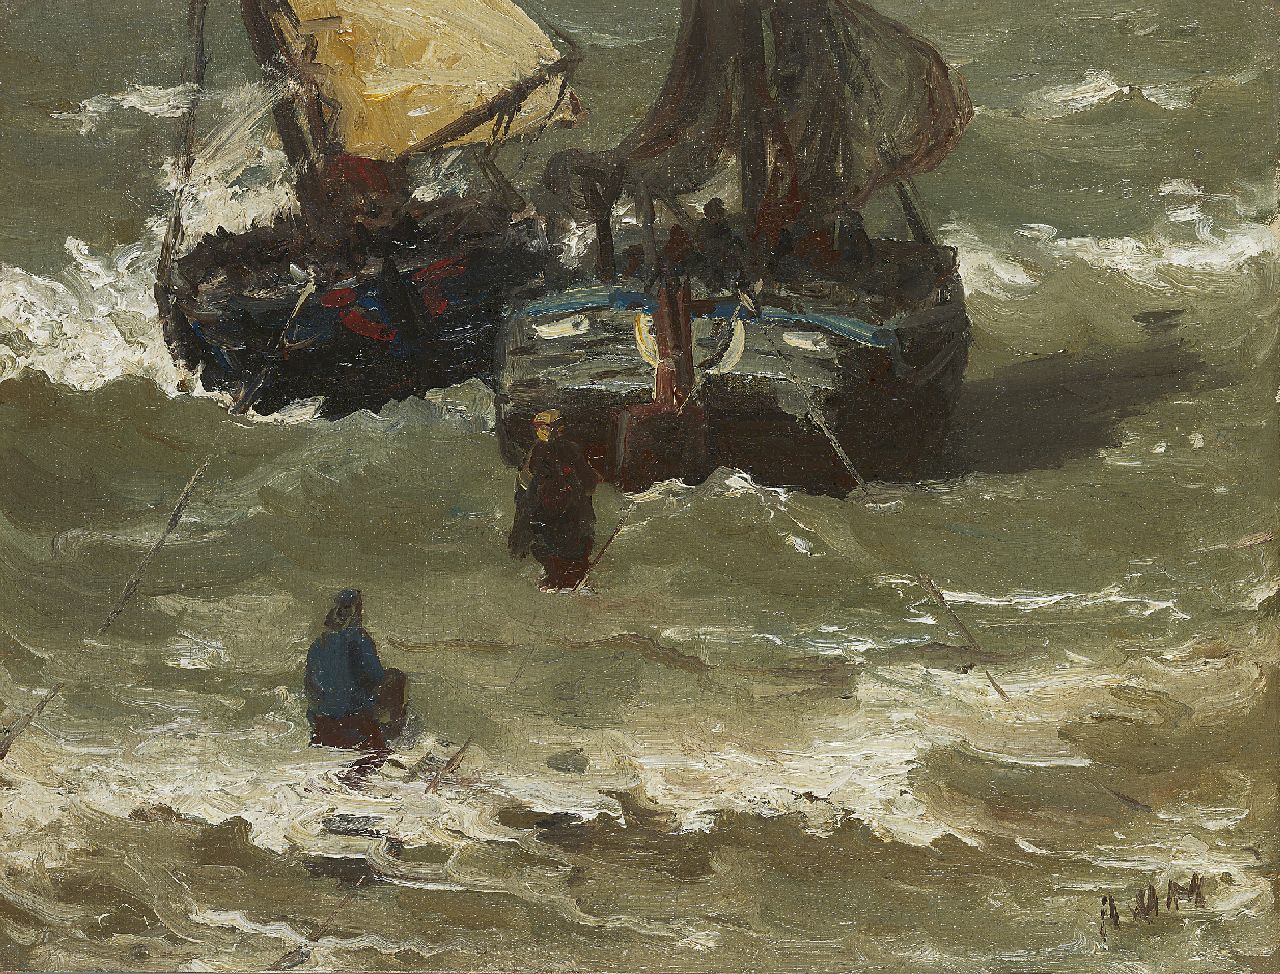 Mesdag H.W.  | Hendrik Willem Mesdag, Two bomschuiten in the surf, oil on canvas laid down on panel 29.2 x 38.5 cm, signed l.r. with initials